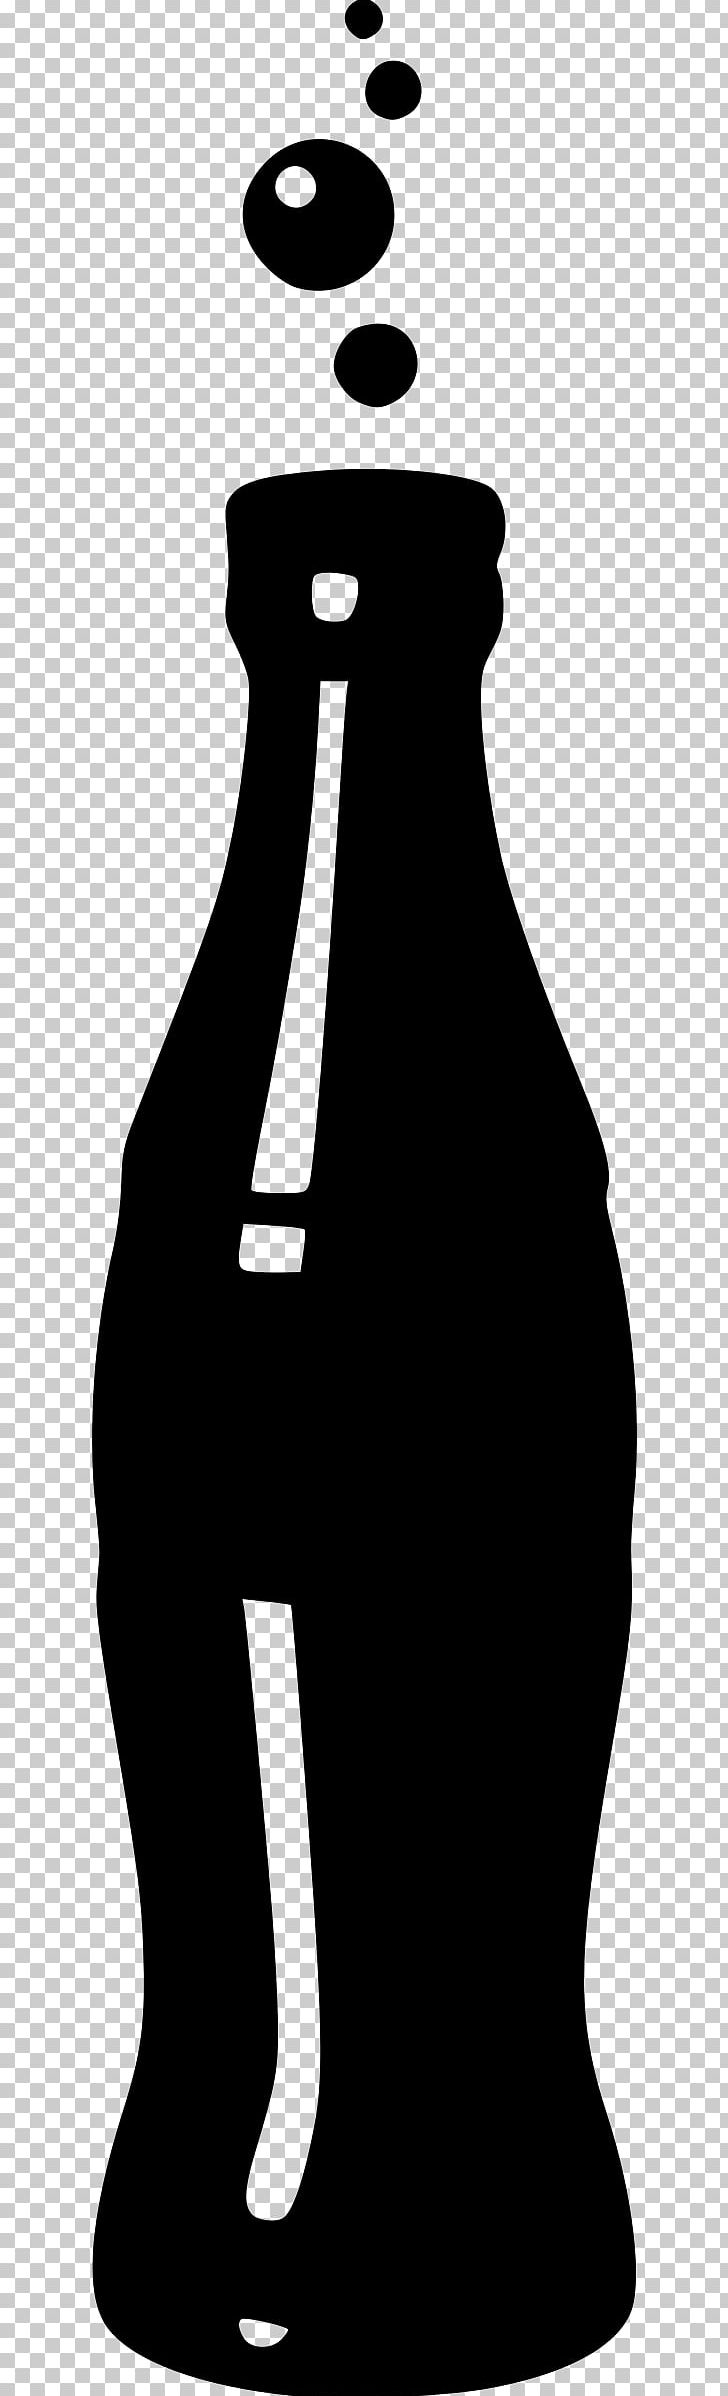 Fizzy Drinks Beverage Can Bottle PNG, Clipart, Beer Bottle, Beverage Can, Black And White, Bottle, Bouteille De Cocacola Free PNG Download